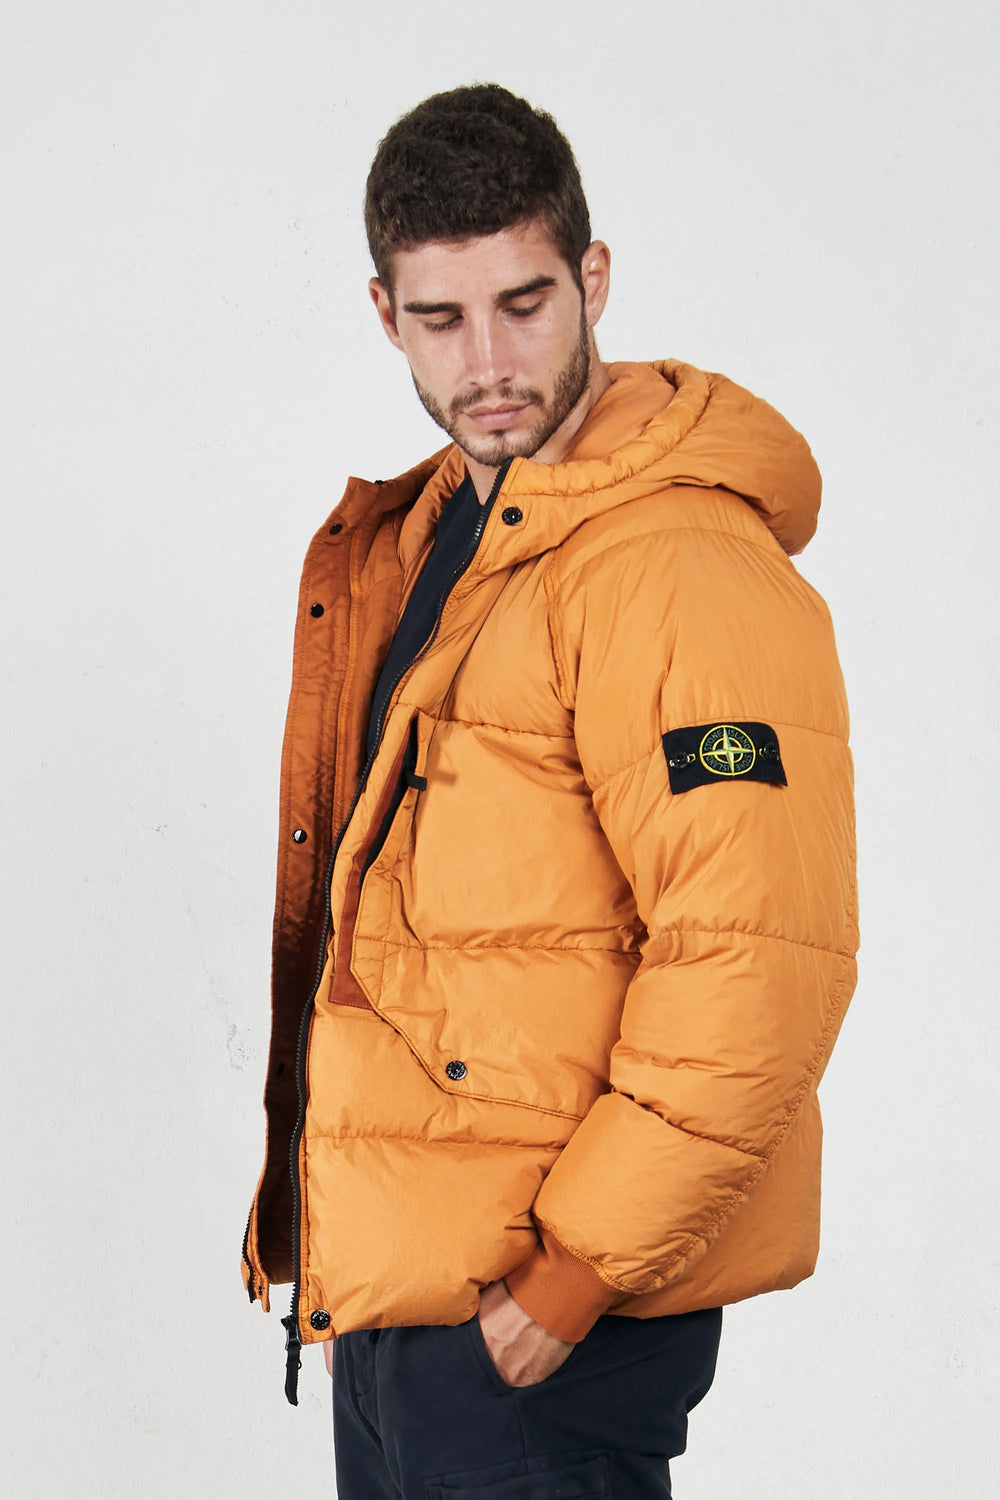 Heavy Coats for Men's Winter Online - Undisputed Warmth for the Cold Season